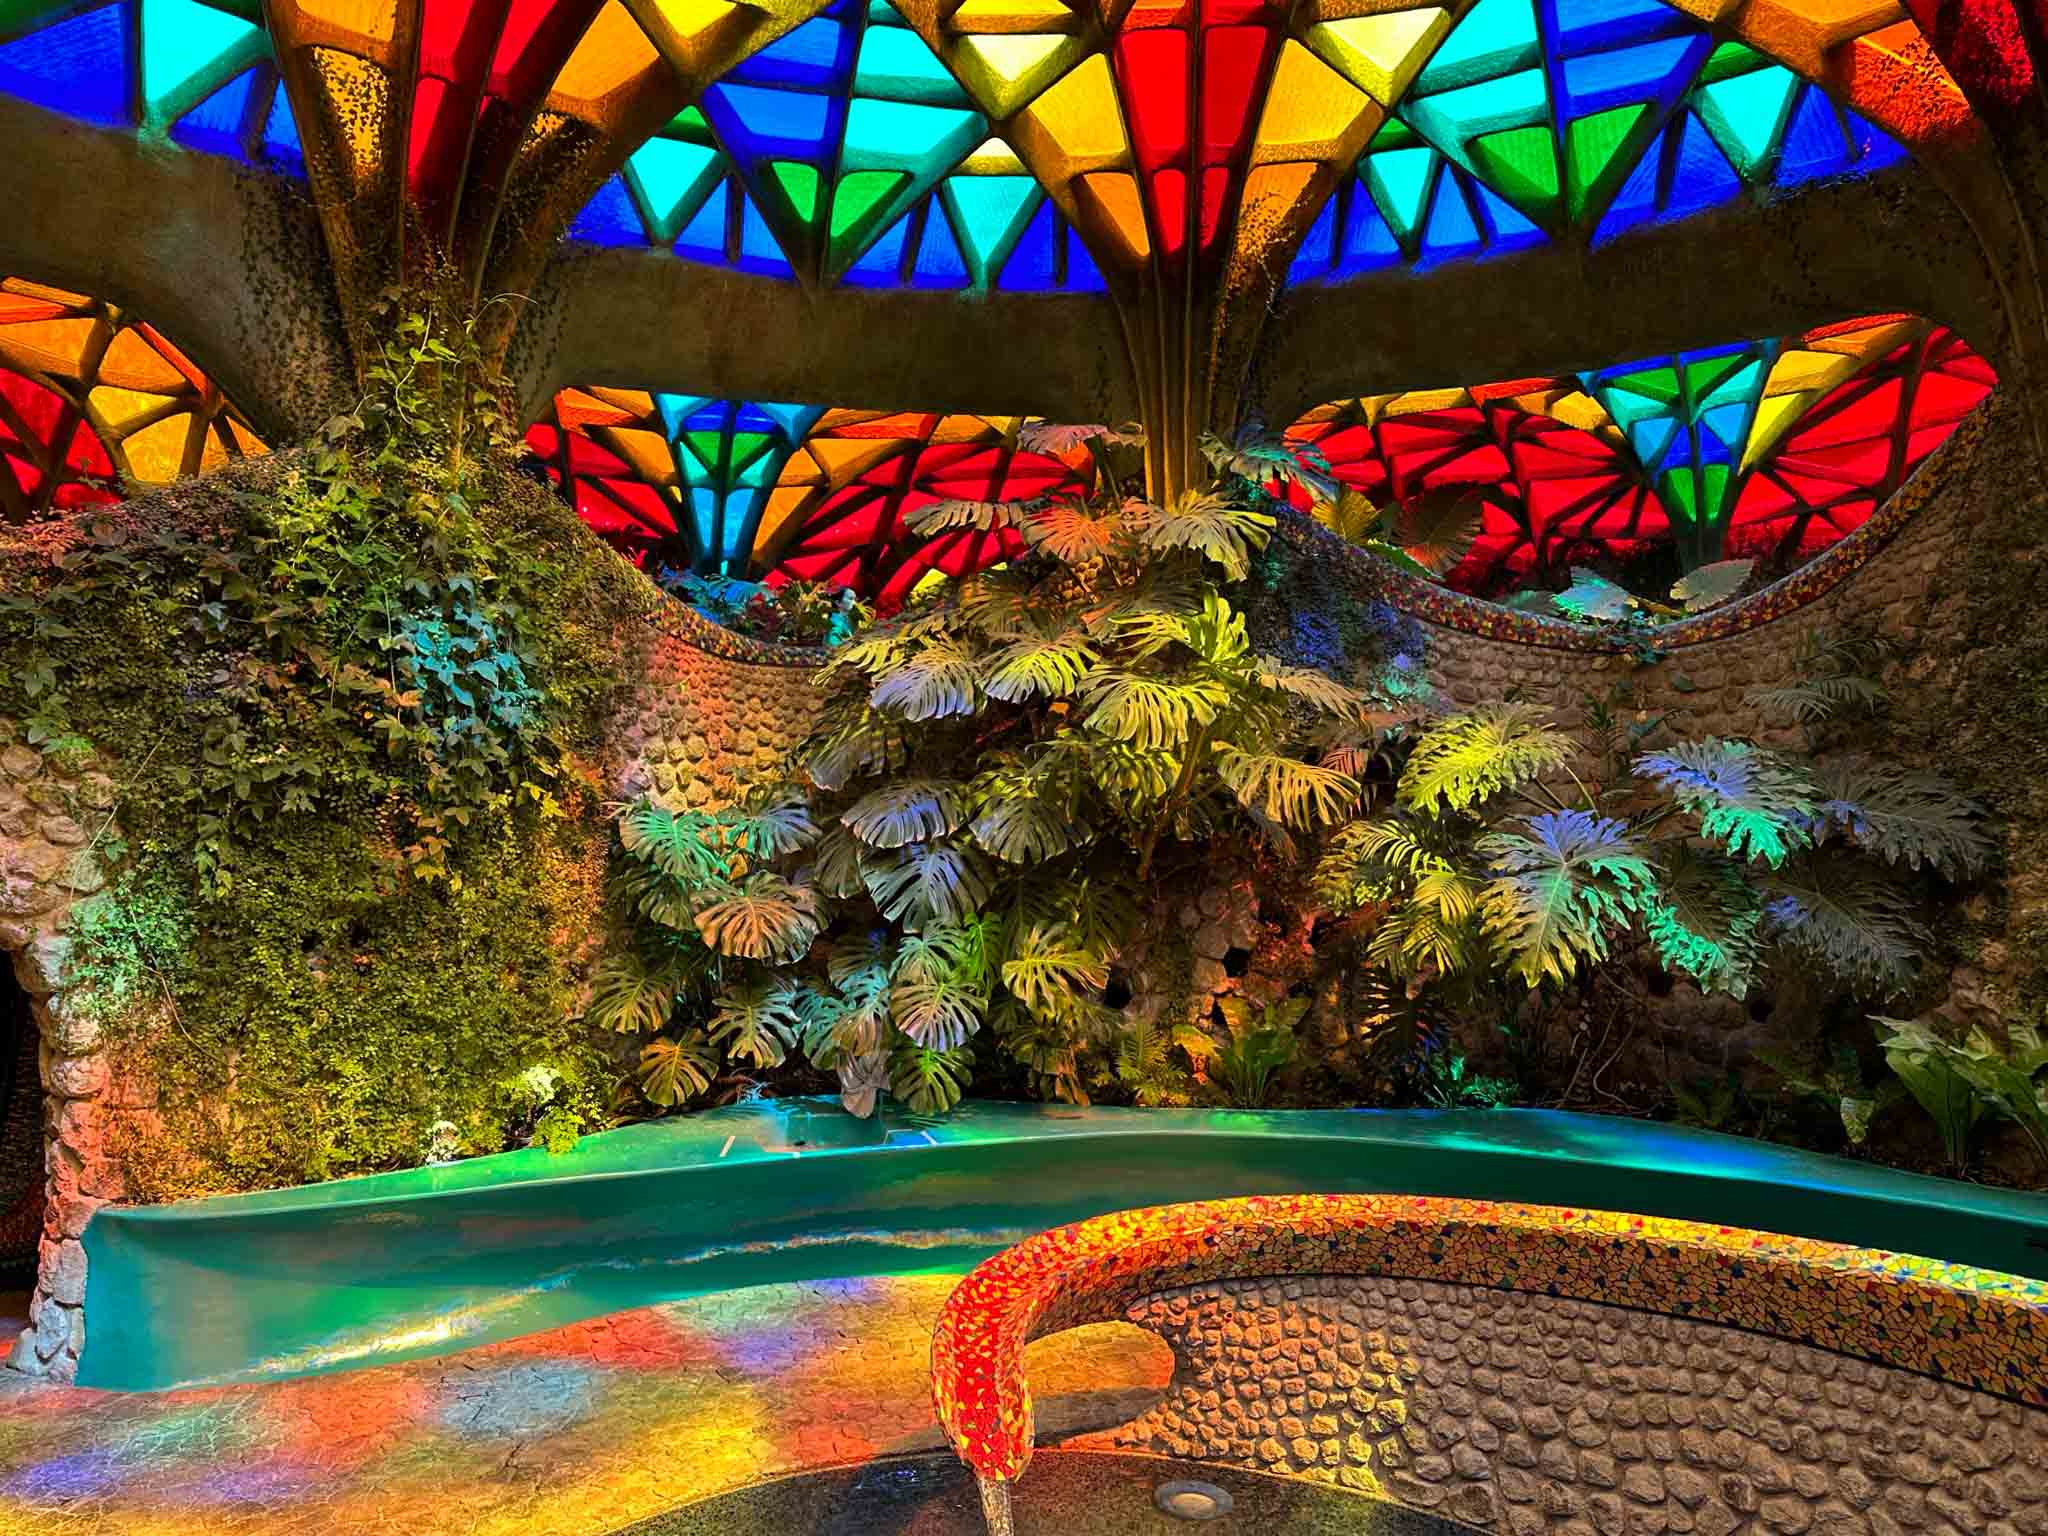 View of an interior garden under a brightly lit stained-glass ceiling